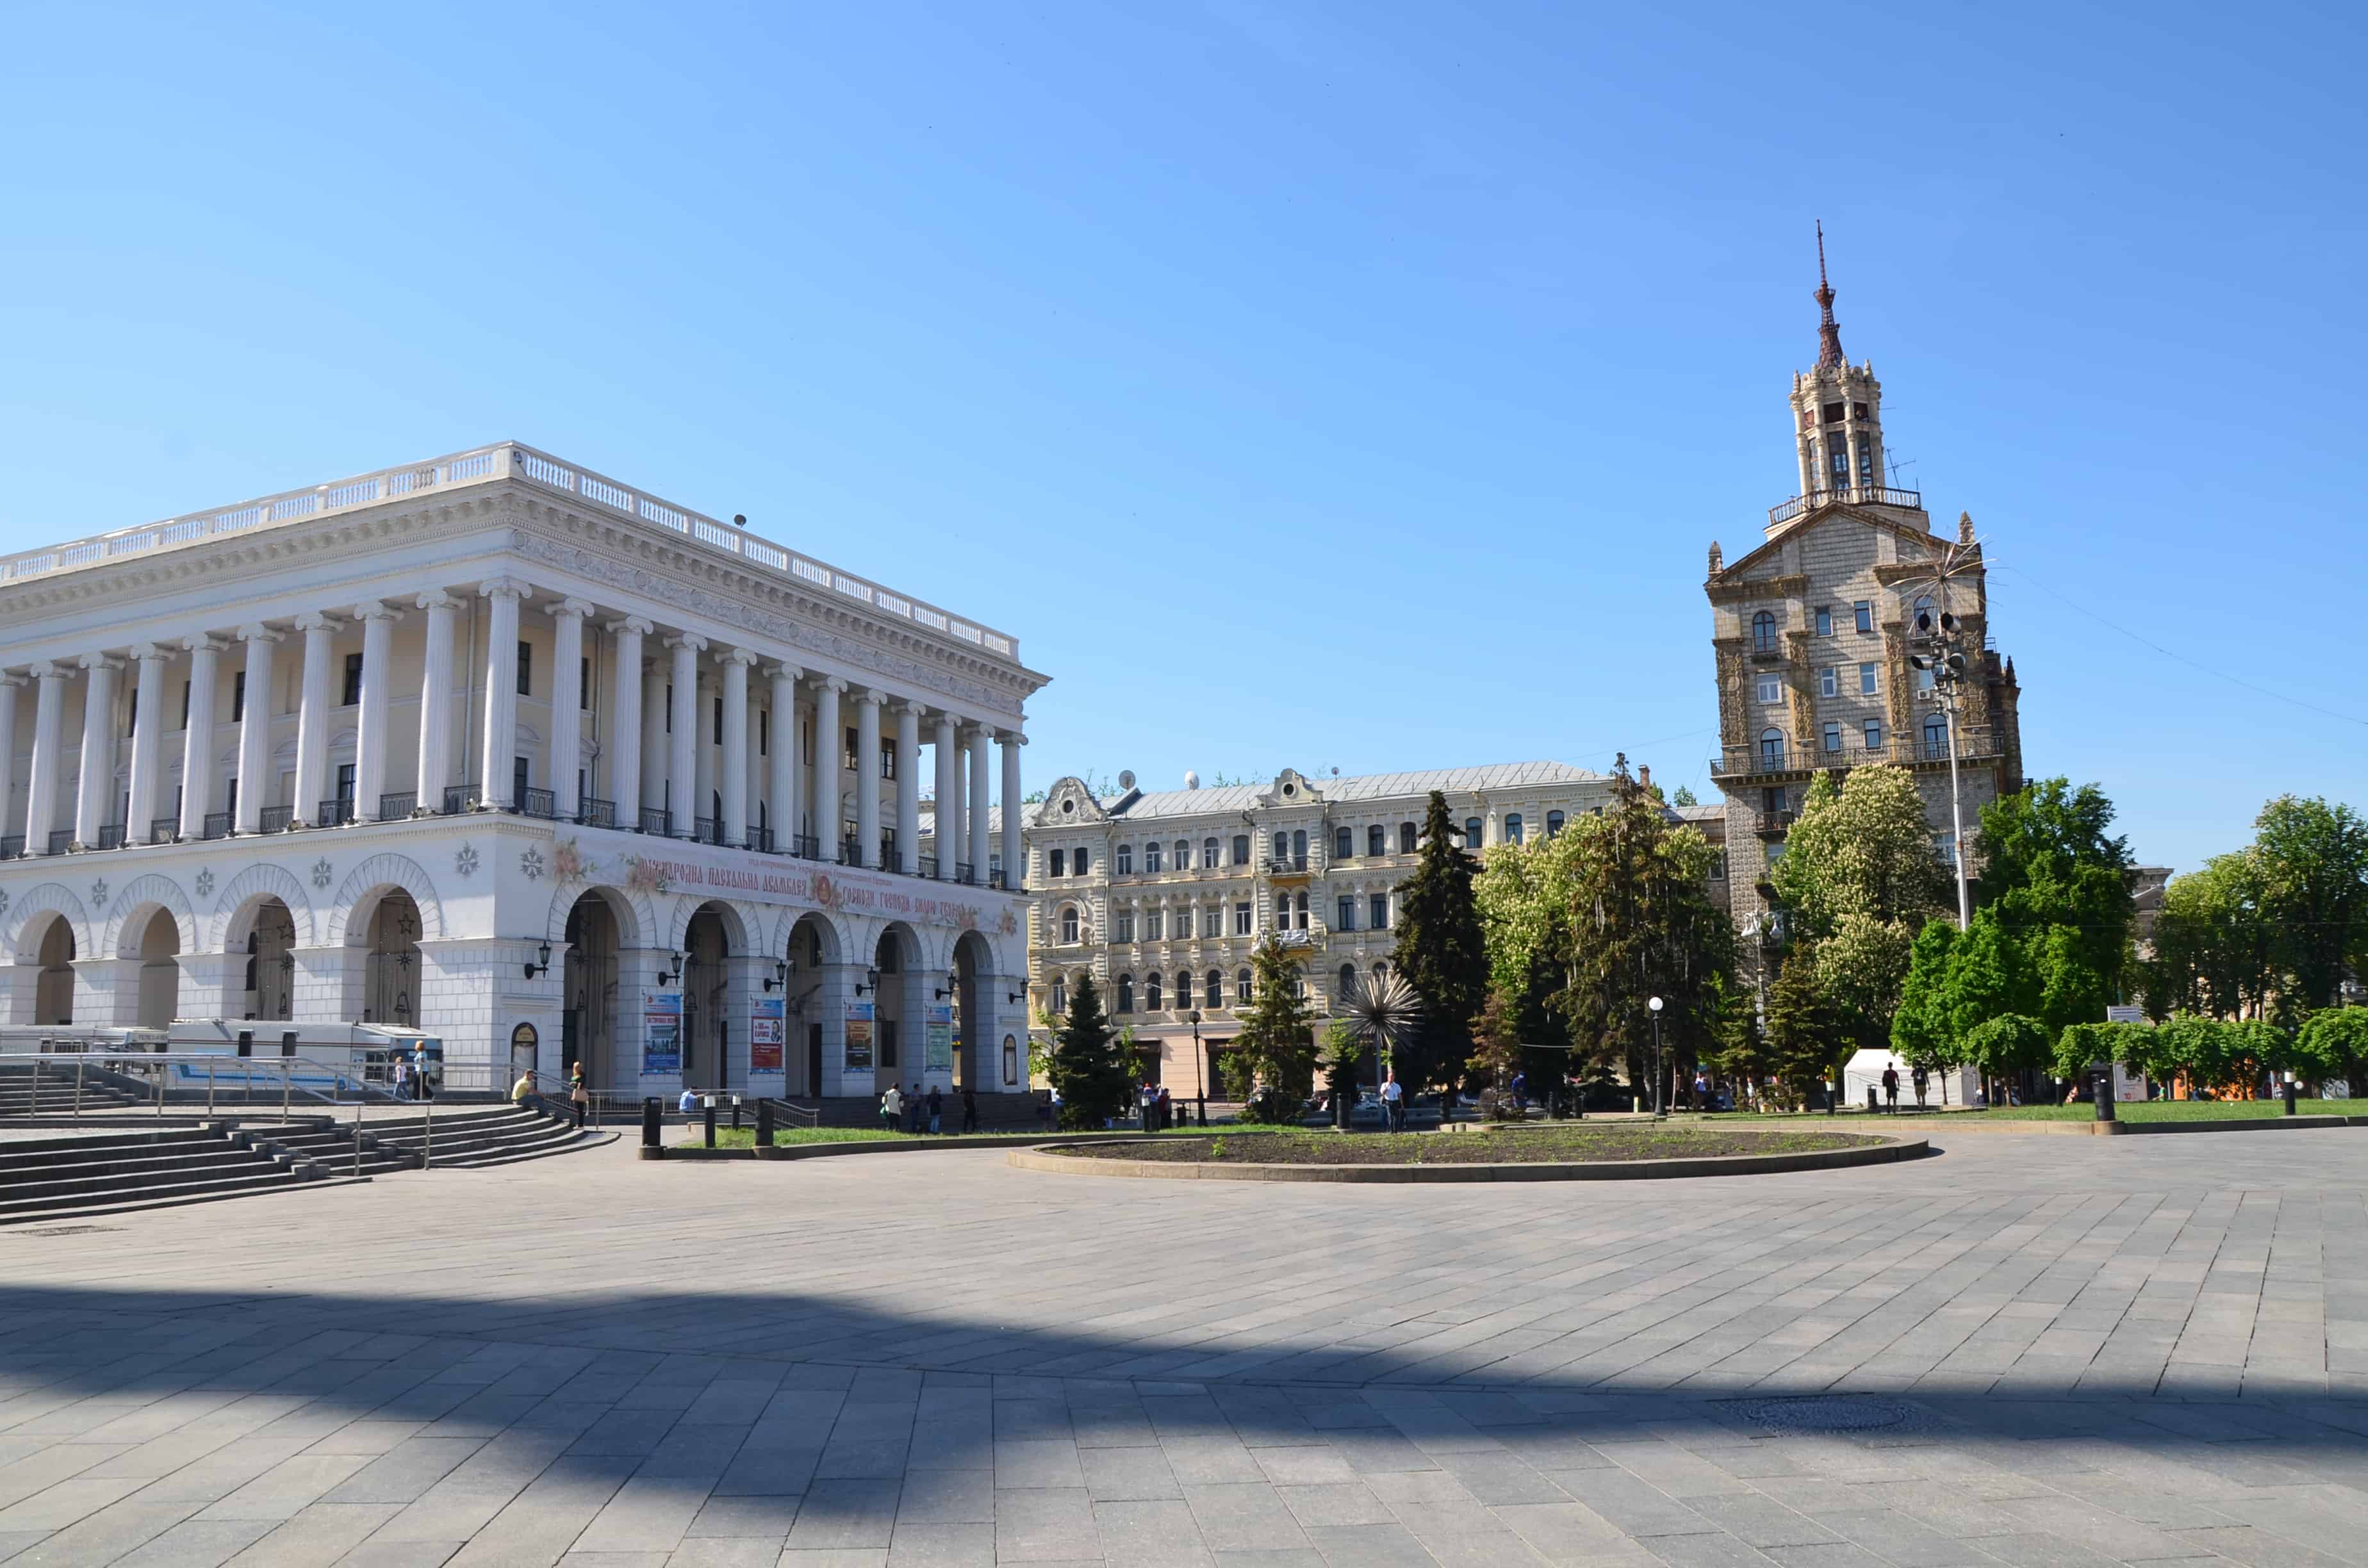 Concert Hall of the Kyiv Conservatory (left) and Ukraine State Department of Food (right) at Independence Square in Kyiv, Ukraine